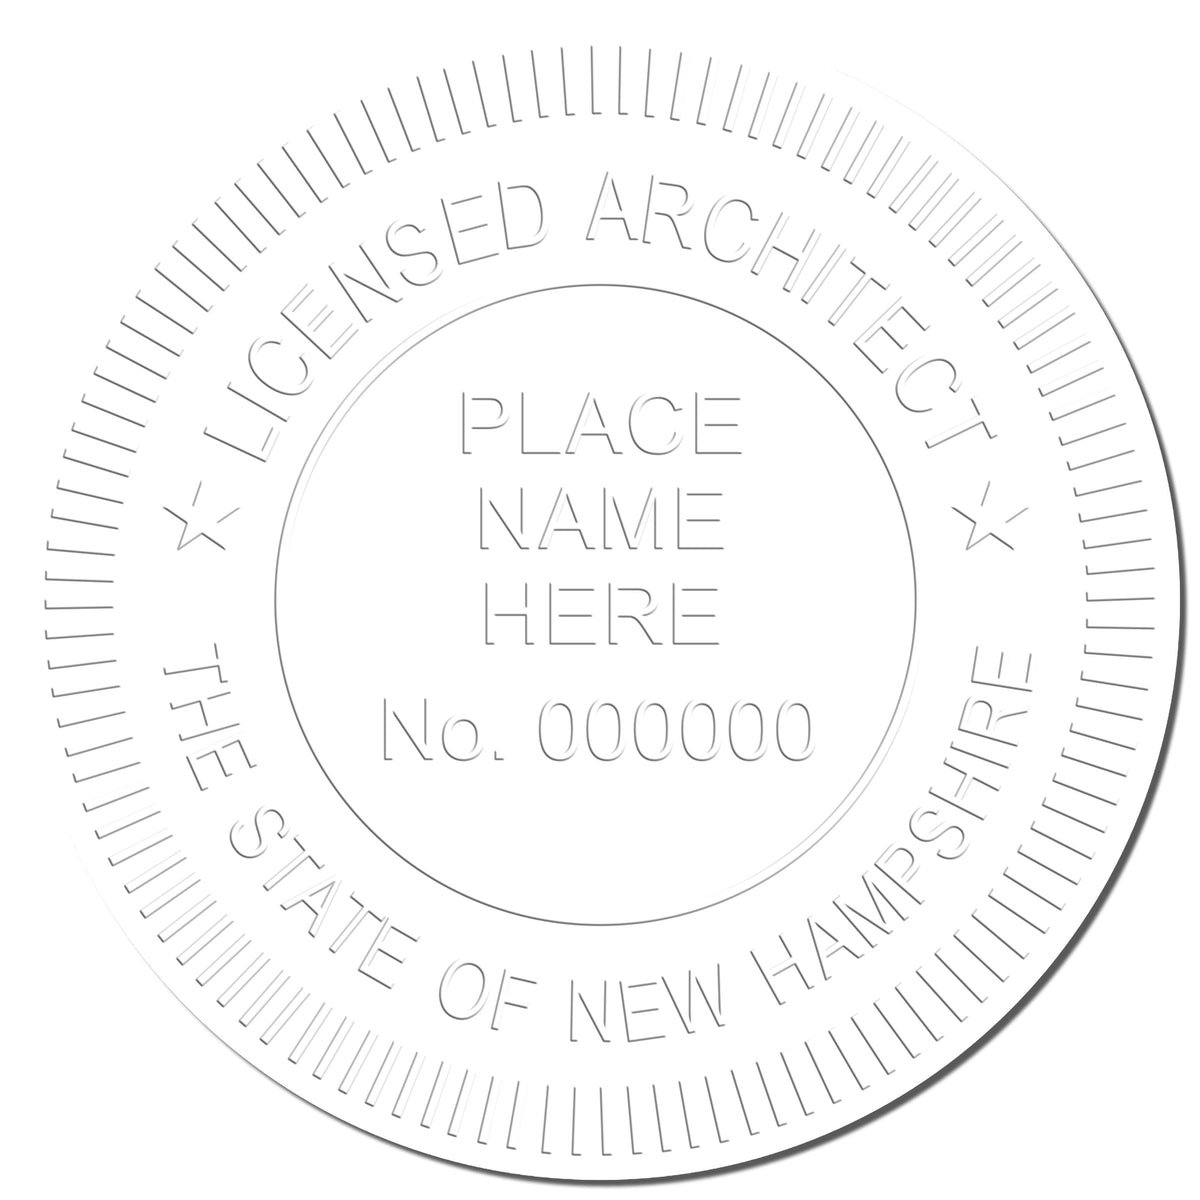 This paper is stamped with a sample imprint of the State of New Hampshire Architectural Seal Embosser, signifying its quality and reliability.